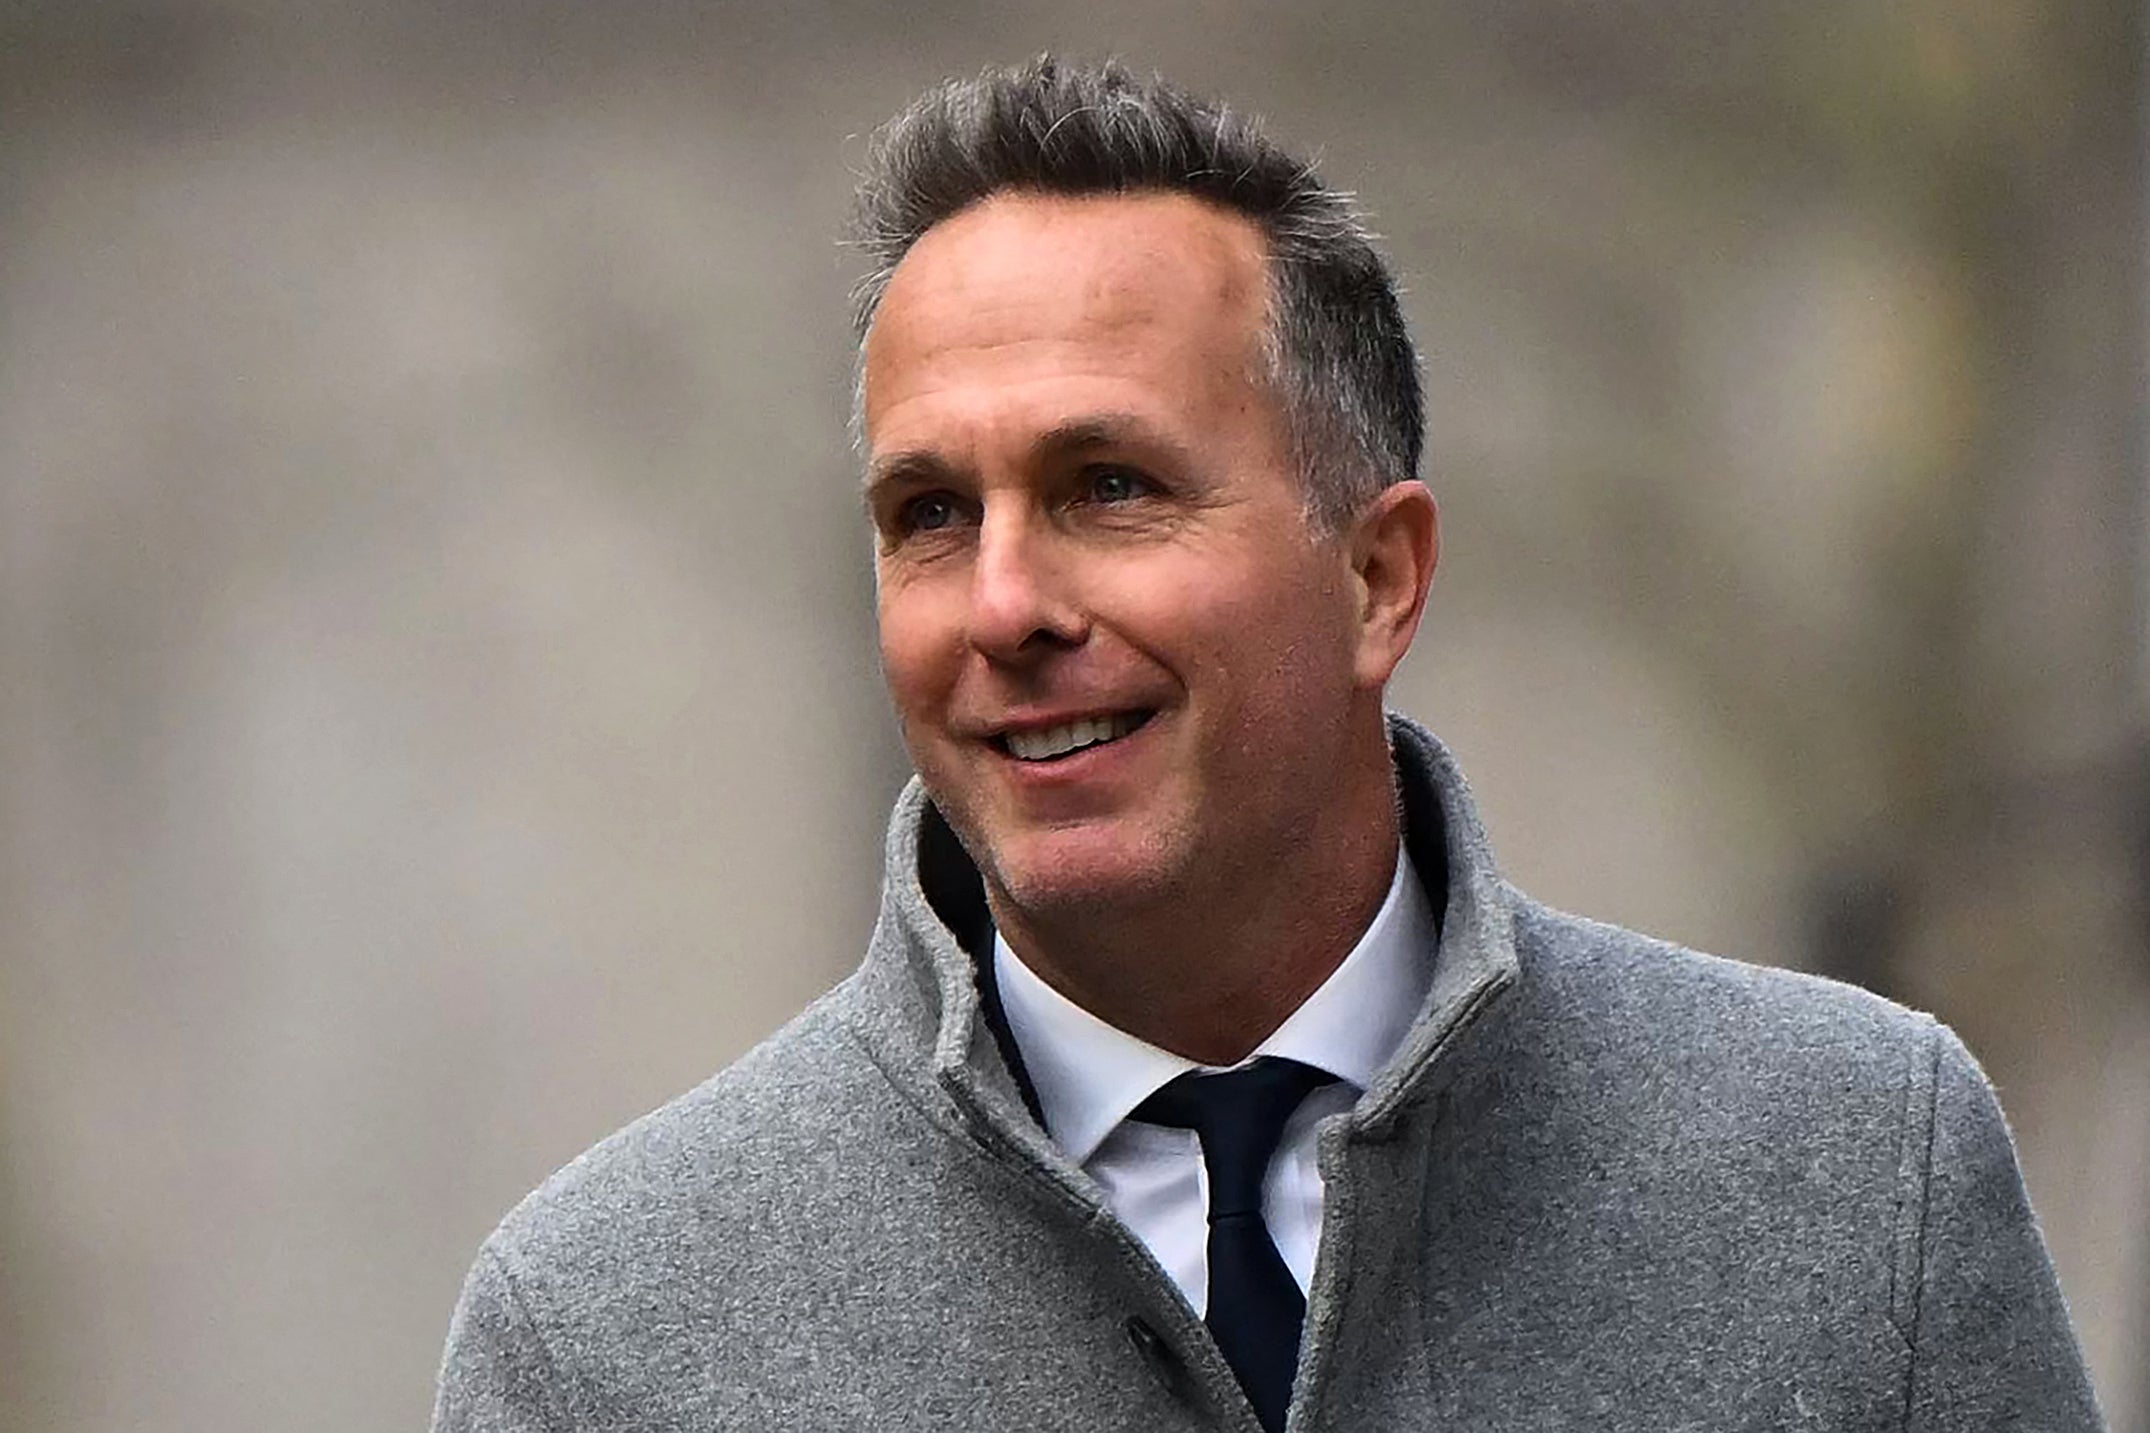 Michael Vaughan was cleared by the CDC panel